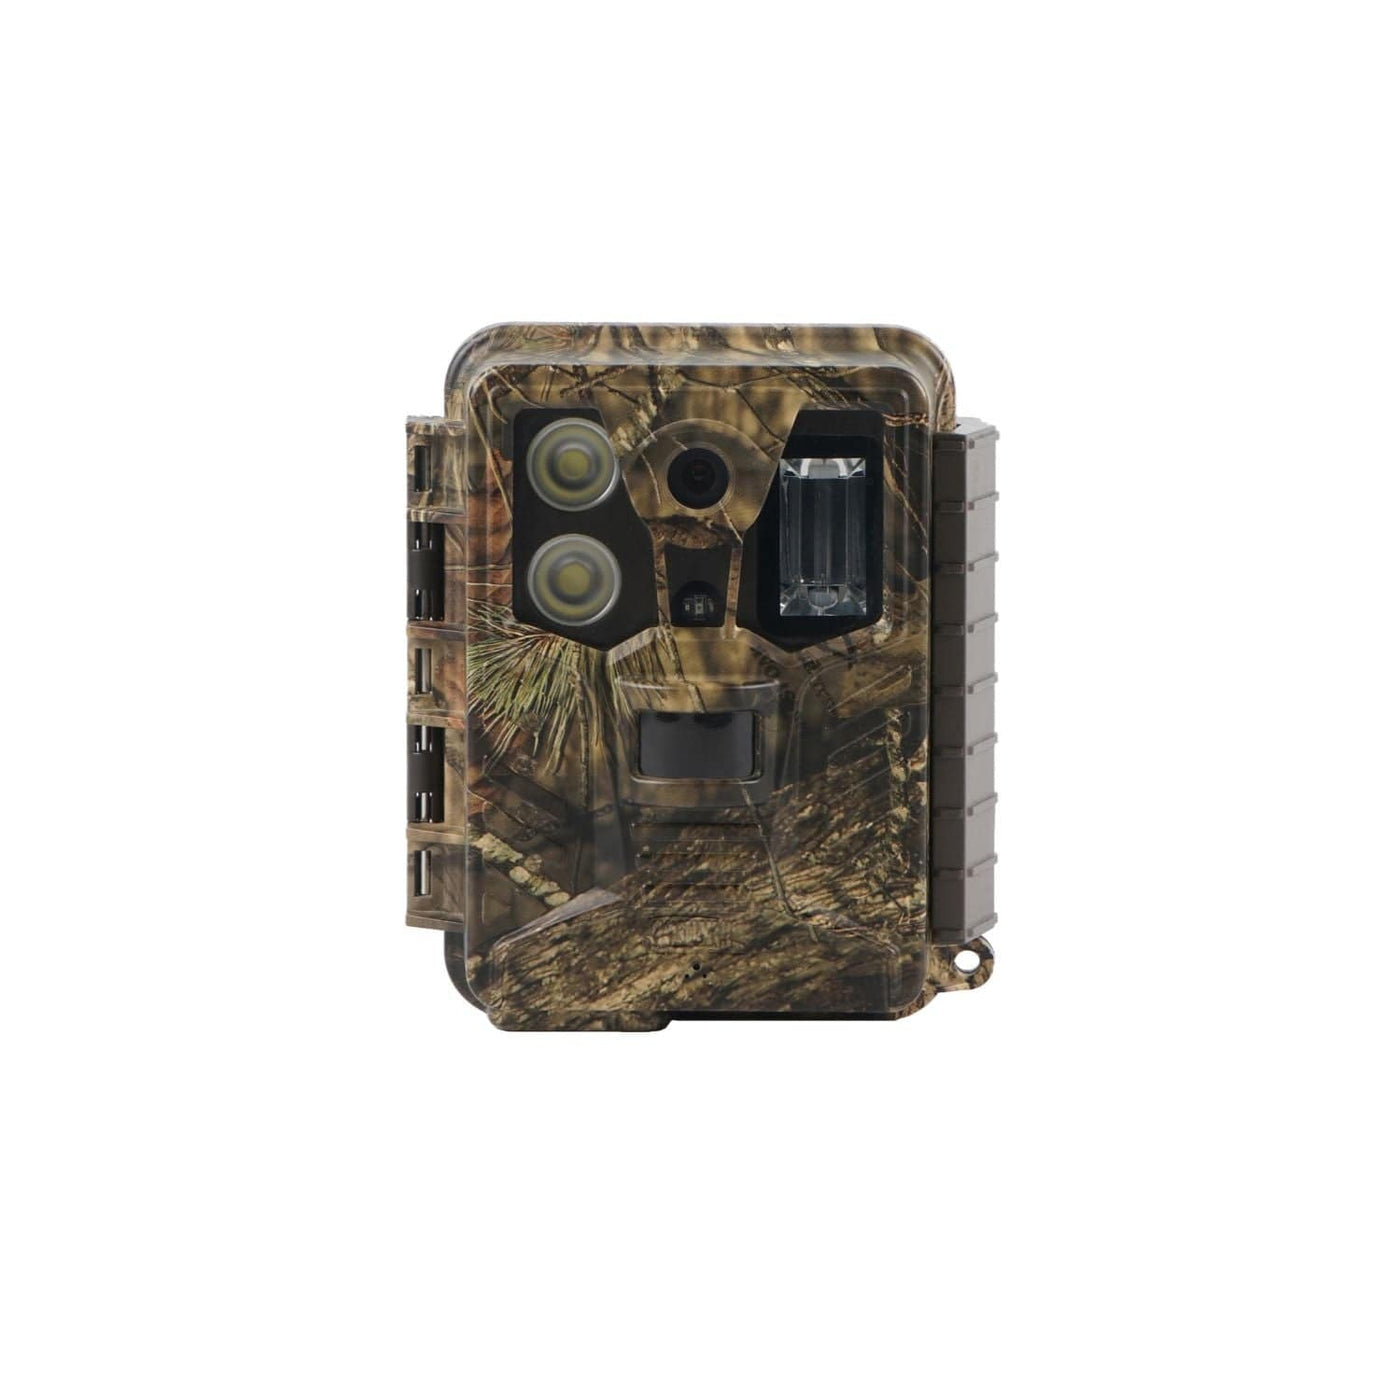 Covert Scouting Cameras Covert NWF18 Trail Camera Hunting